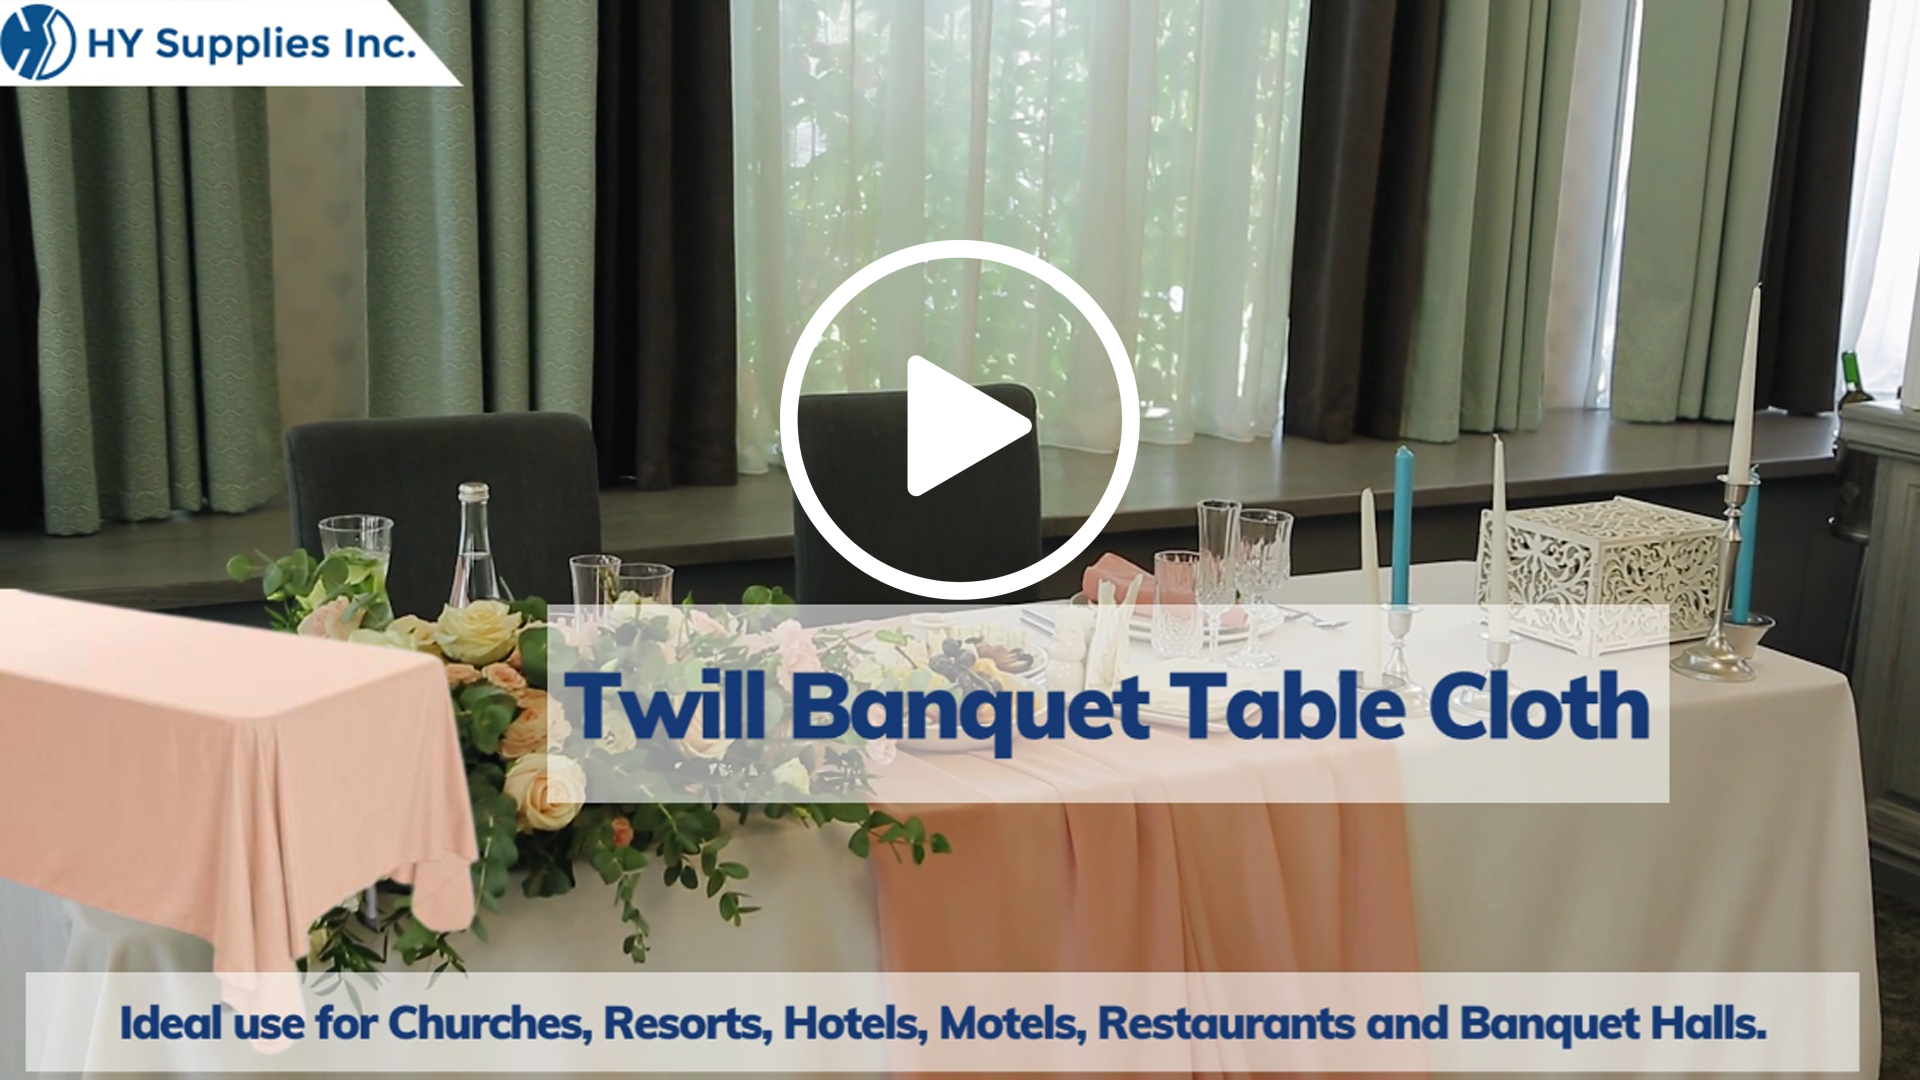 Twill Banquet Table Cloth